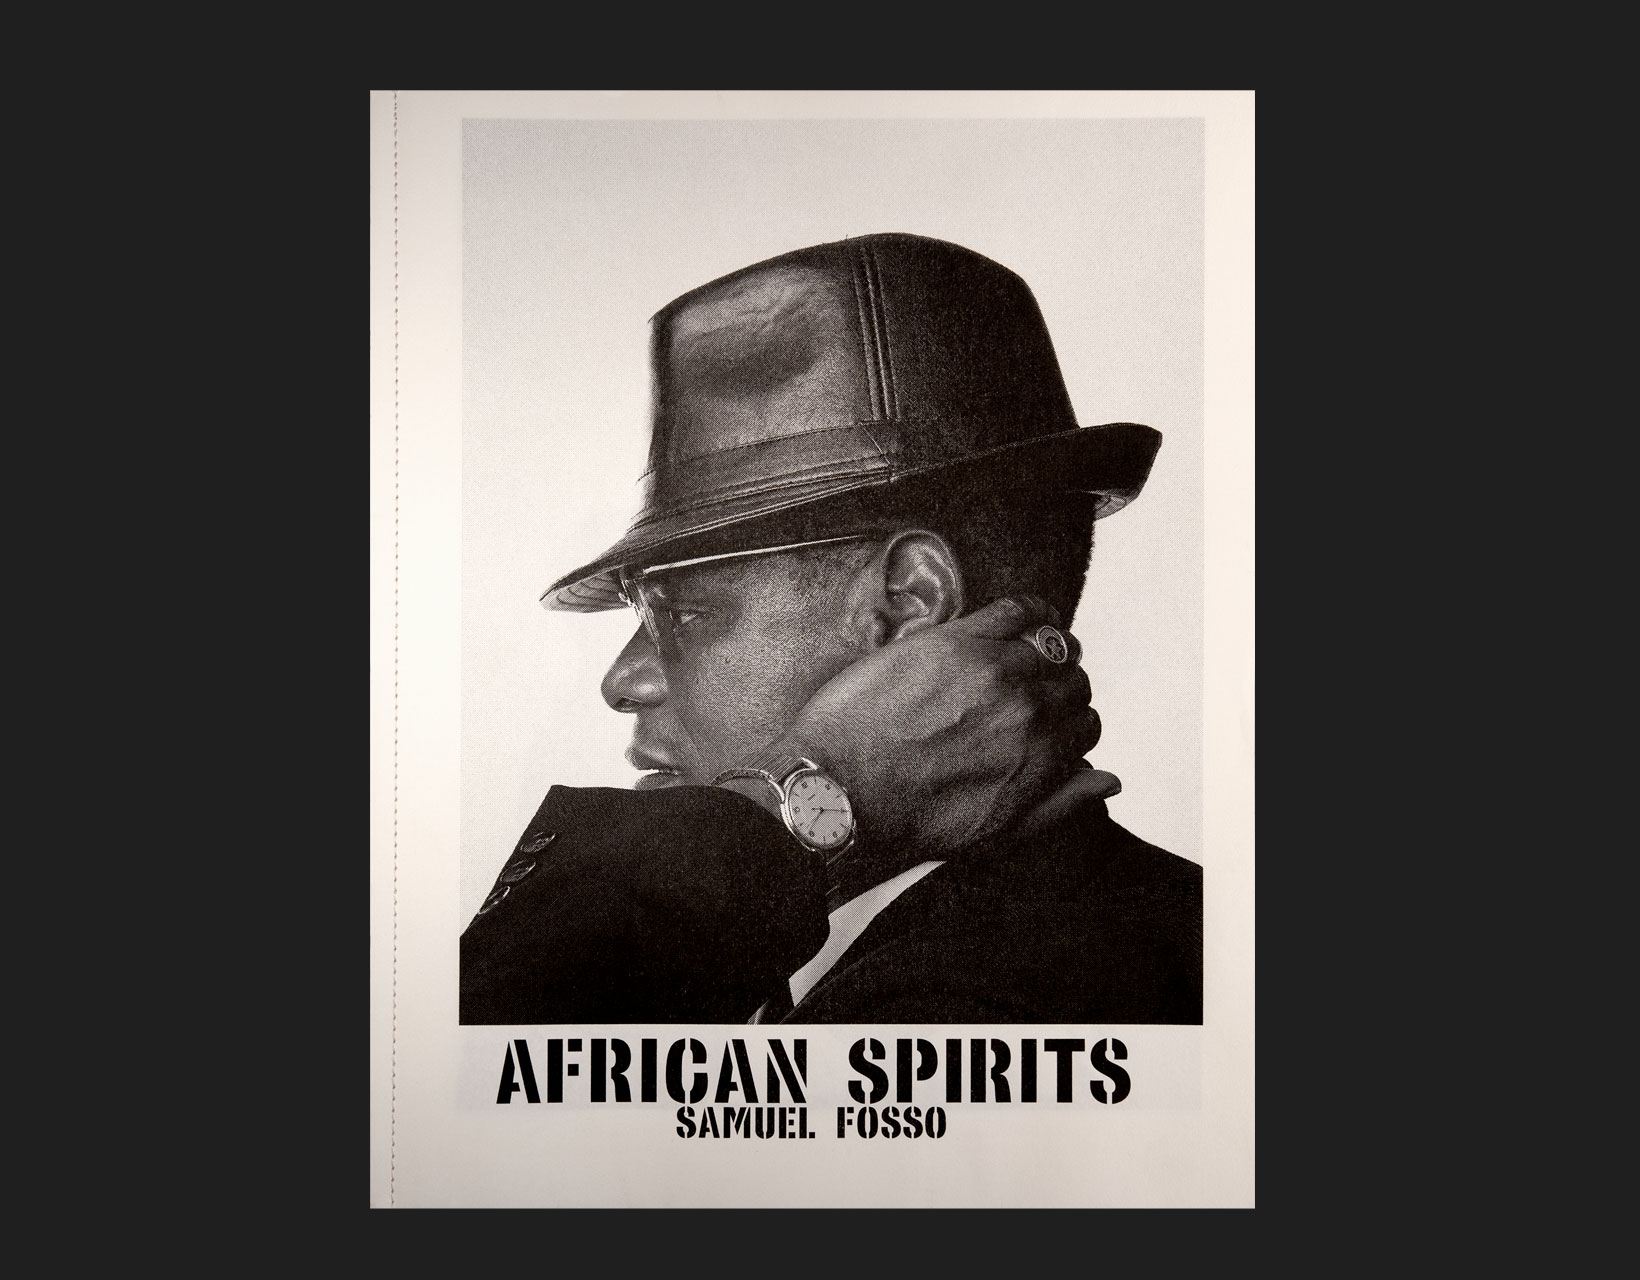 African Spirits by Samuel Fosso